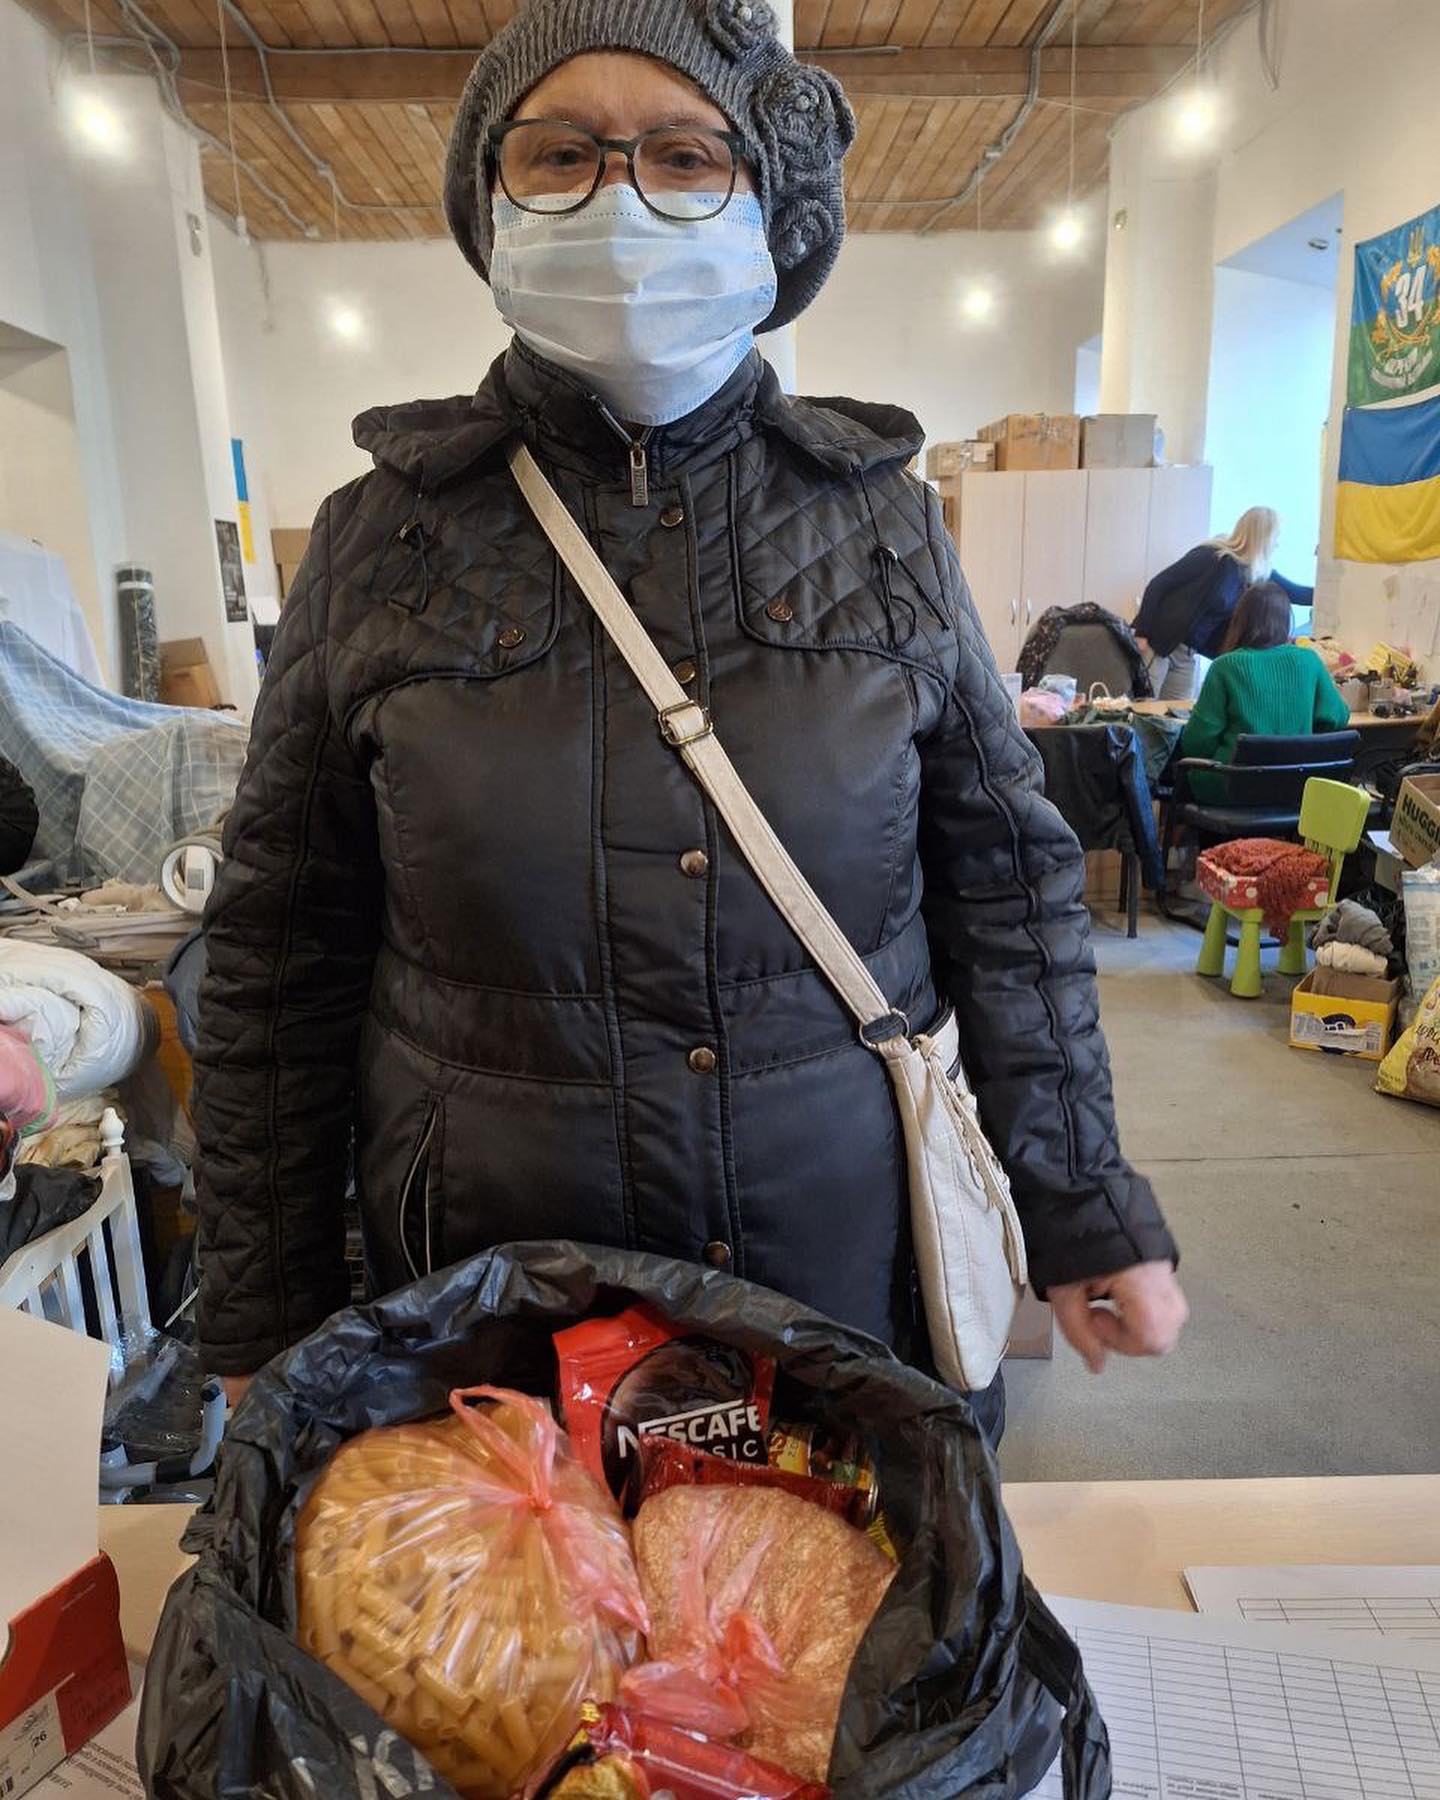 A woman wearing a face mask stands next to a bag of food.